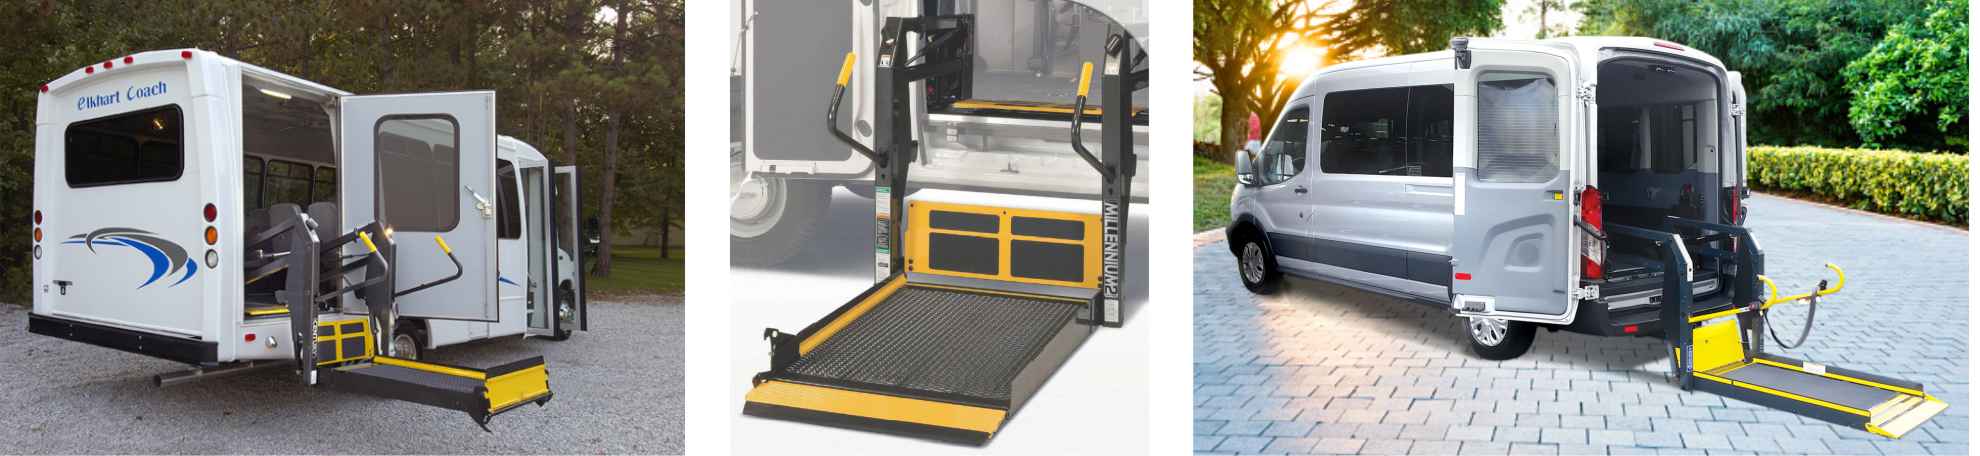 ADA Wheelchair Lifts For Commercial Vans, Buses & Shuttles